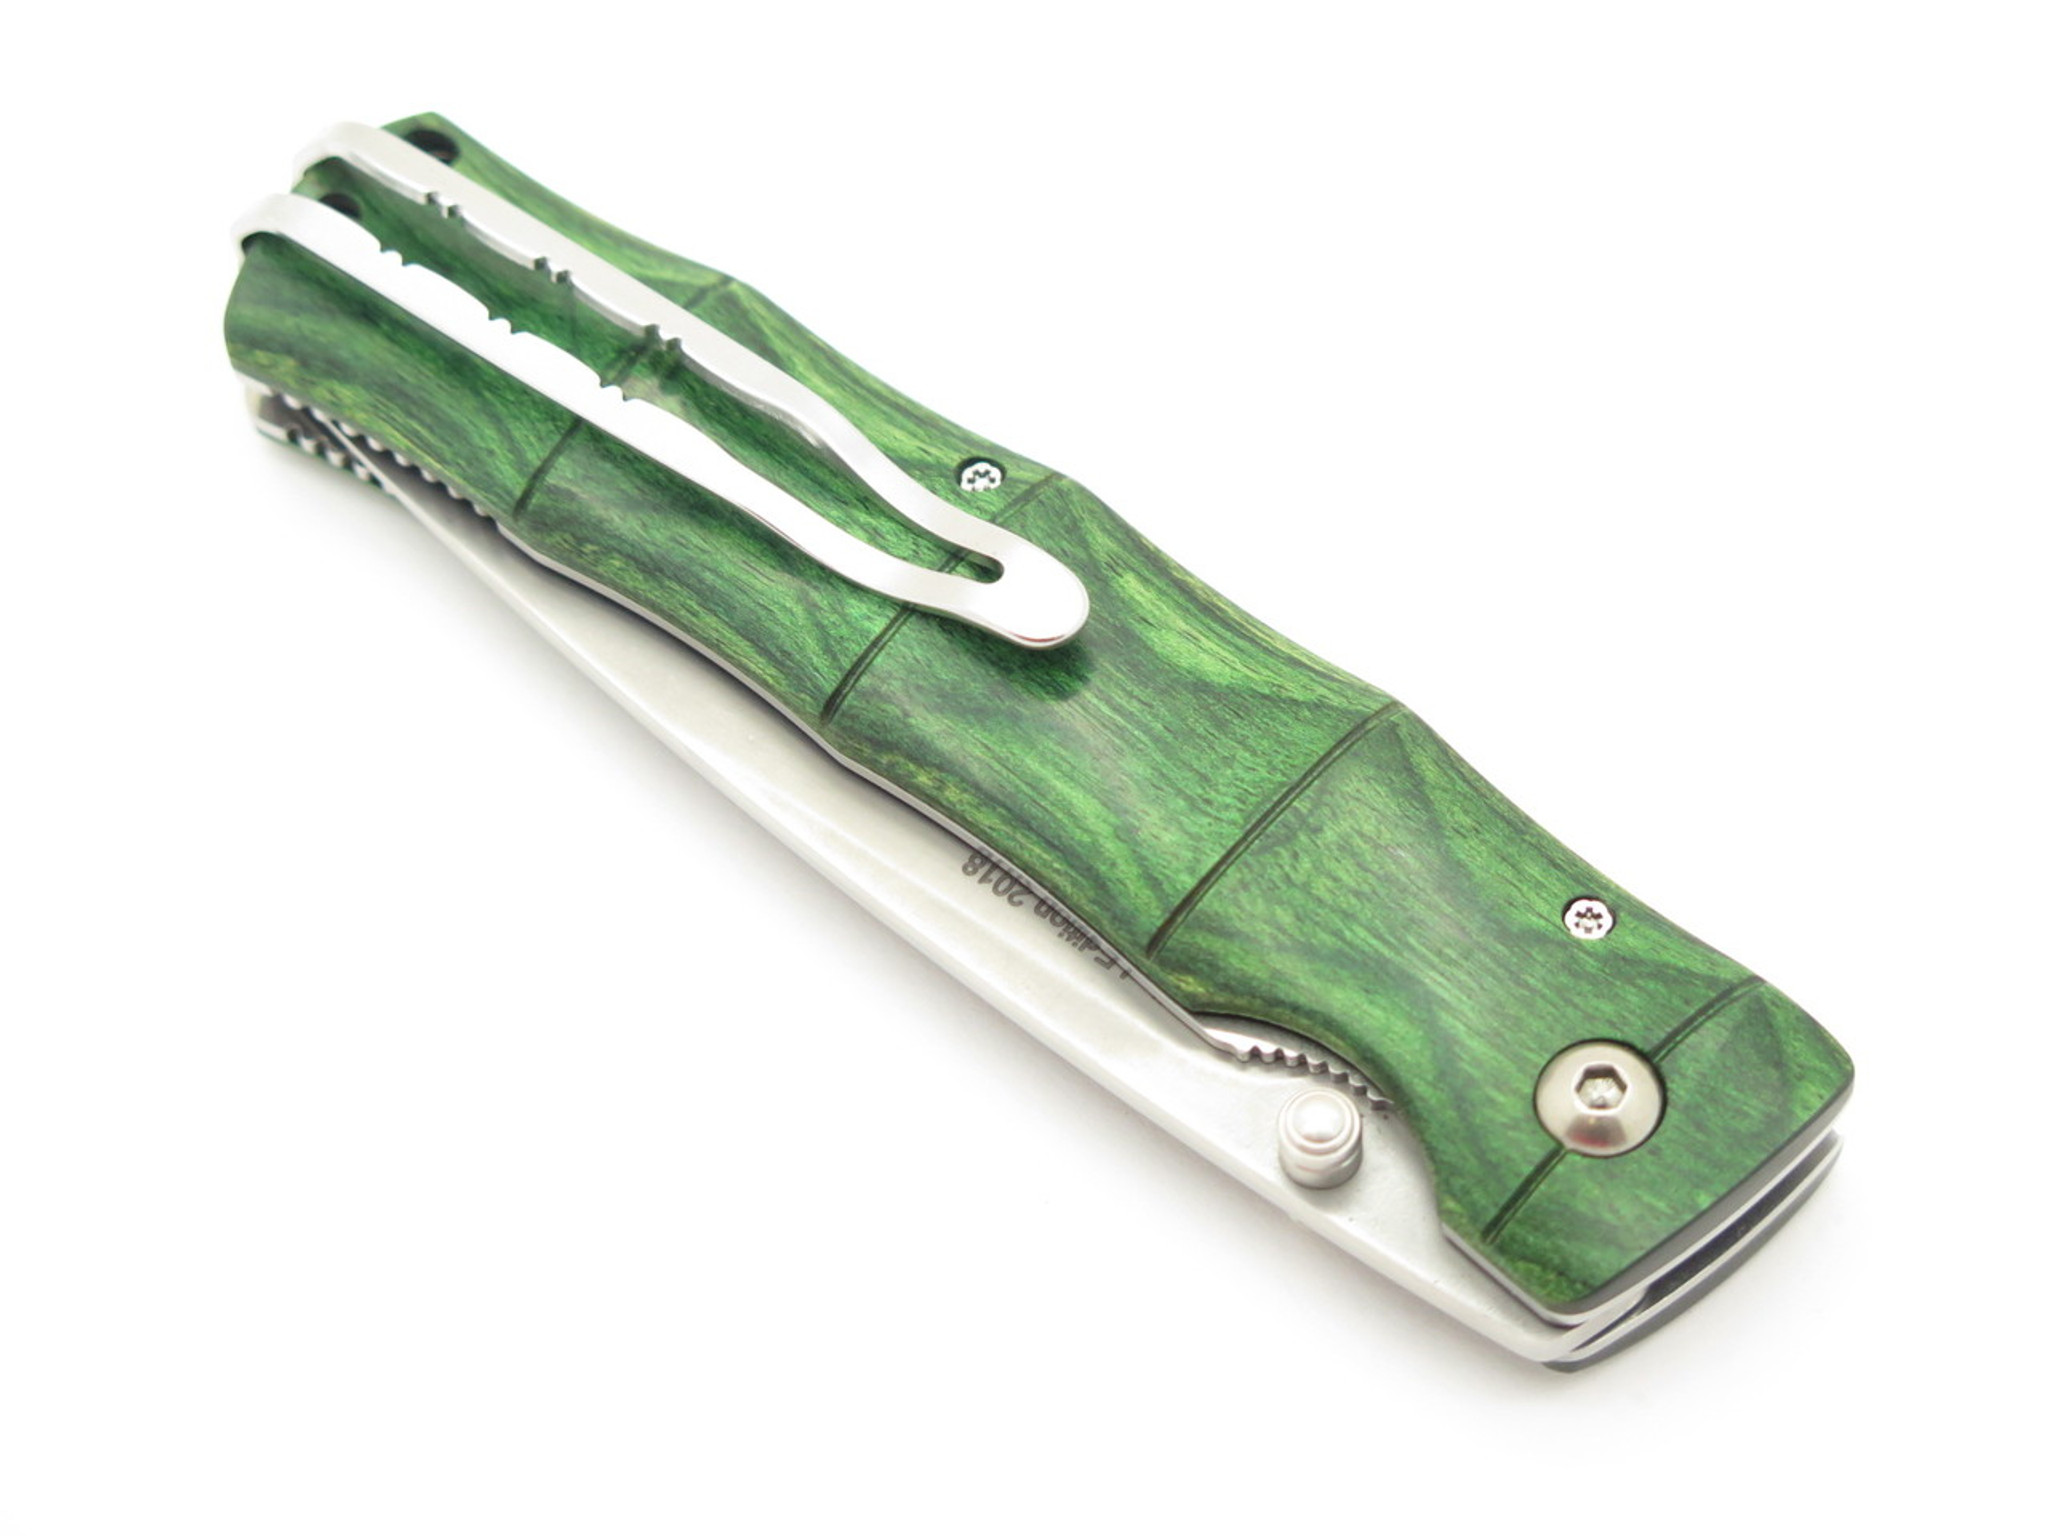 Japanese Army Pen Knife Can Opener - Green